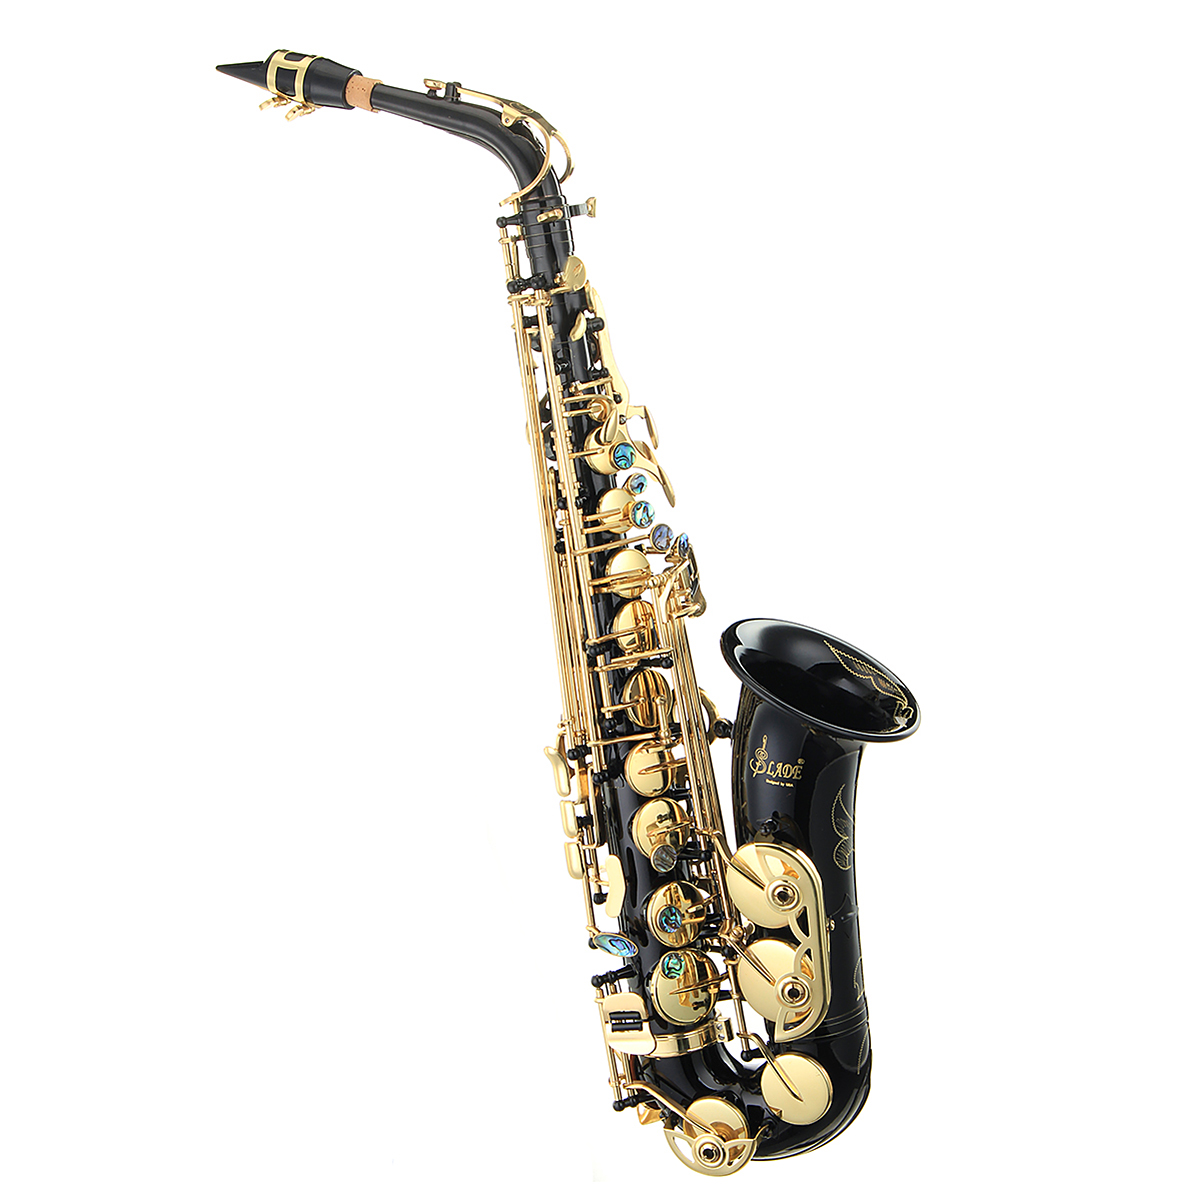 Brass-Engraved-Eb-E-Flat-Alto-Saxophone-Sax-With-Case-Gloves-Cleaning-Cloth-Belt-Brush-1428785